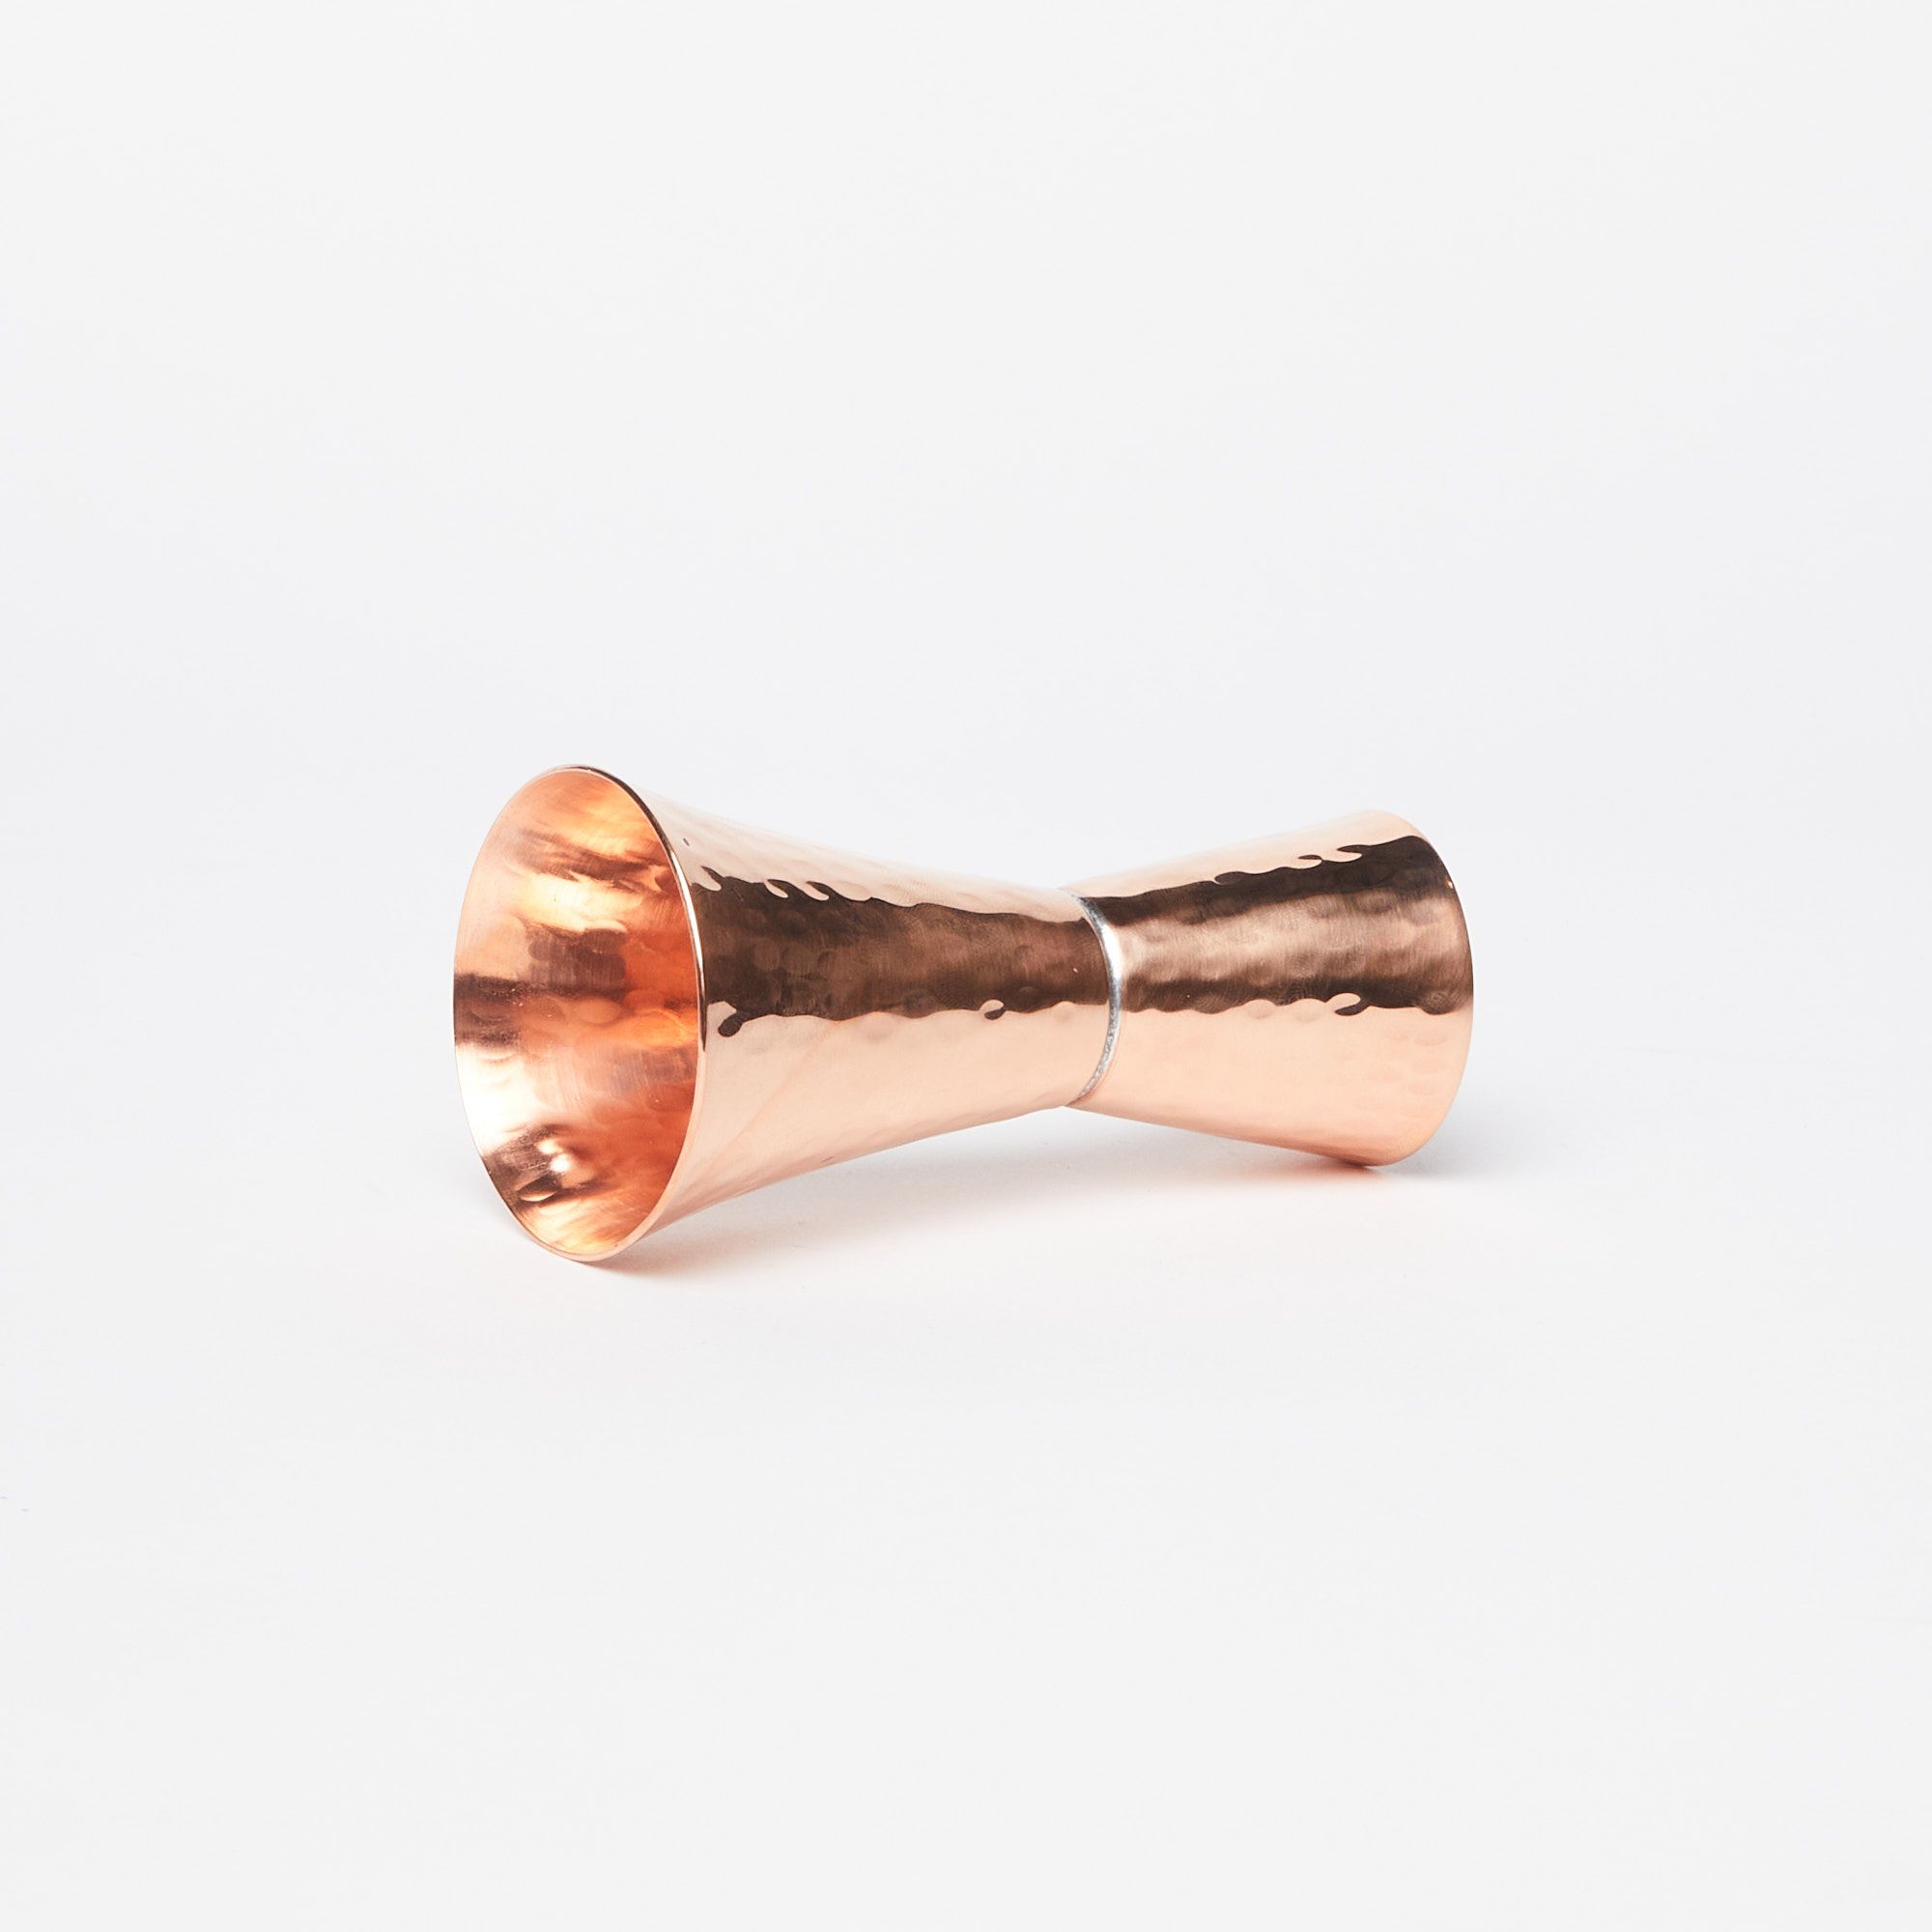 A double sided copper shot measurer laying on its side on a white background